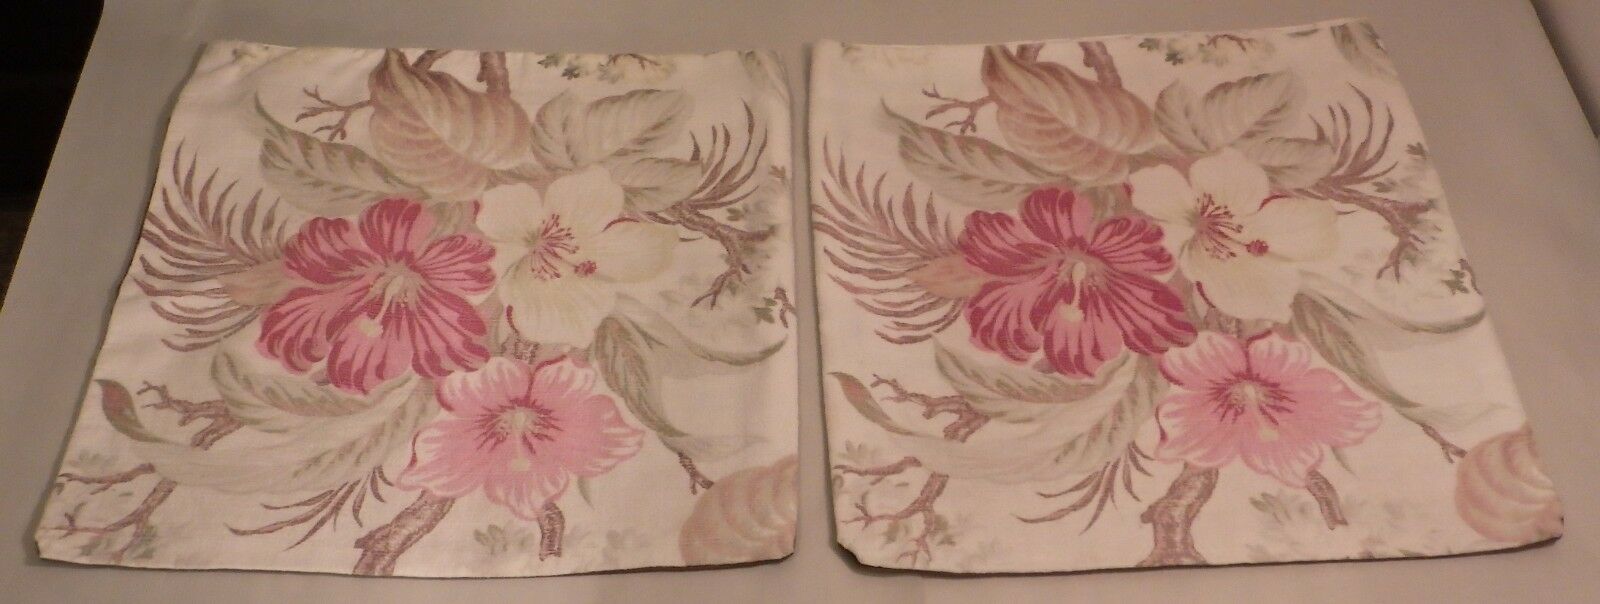 2 Vintage Barkcloth Fabric Pillow Cases Covers 18